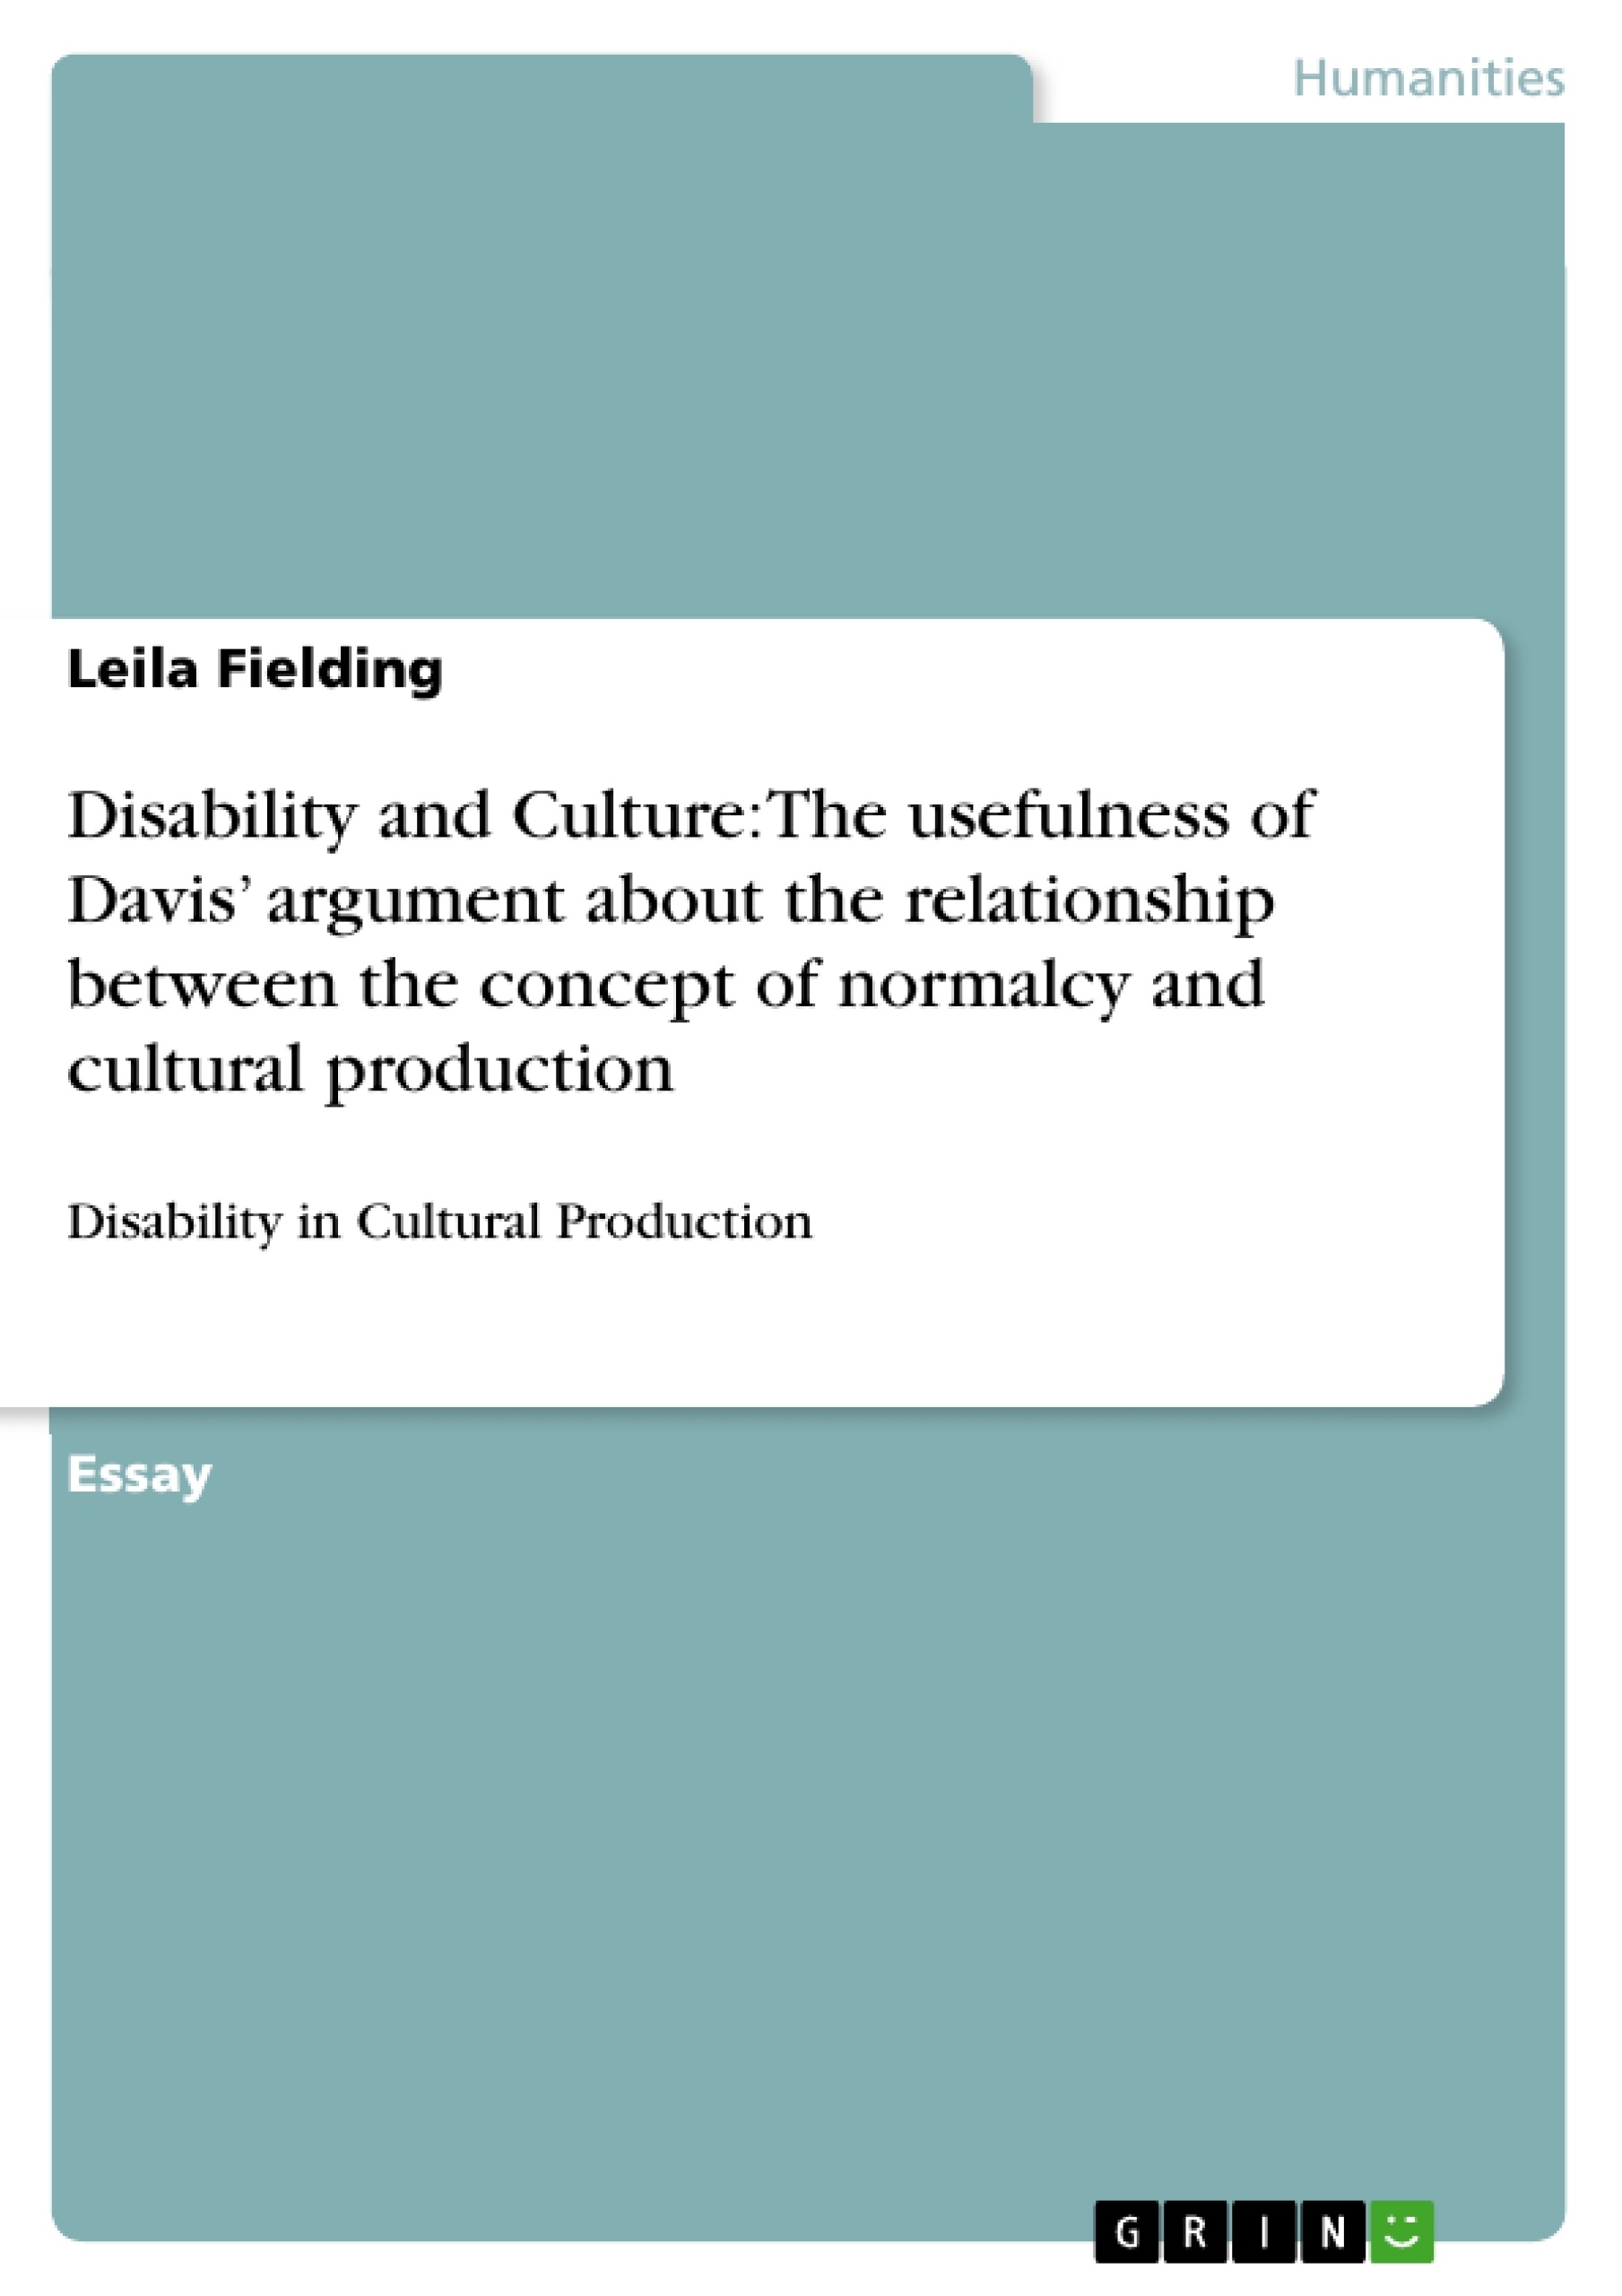 Titel: Disability and Culture: The usefulness of Davis’ argument about the relationship between the concept of normalcy and cultural production